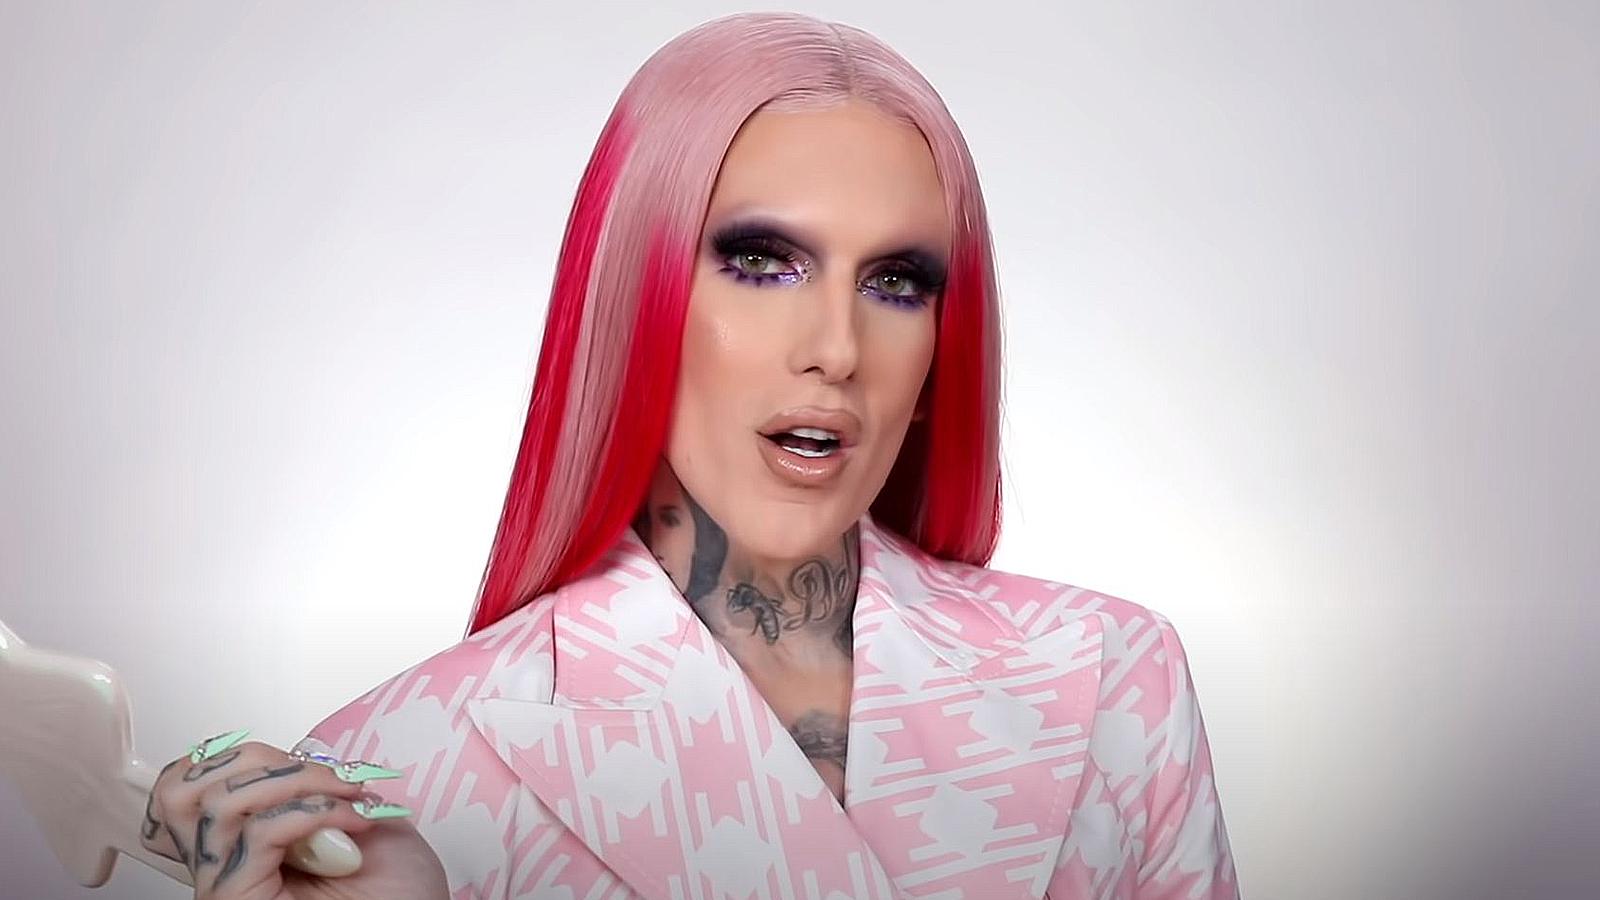 YouTuber Jeffree Star talks to the camera